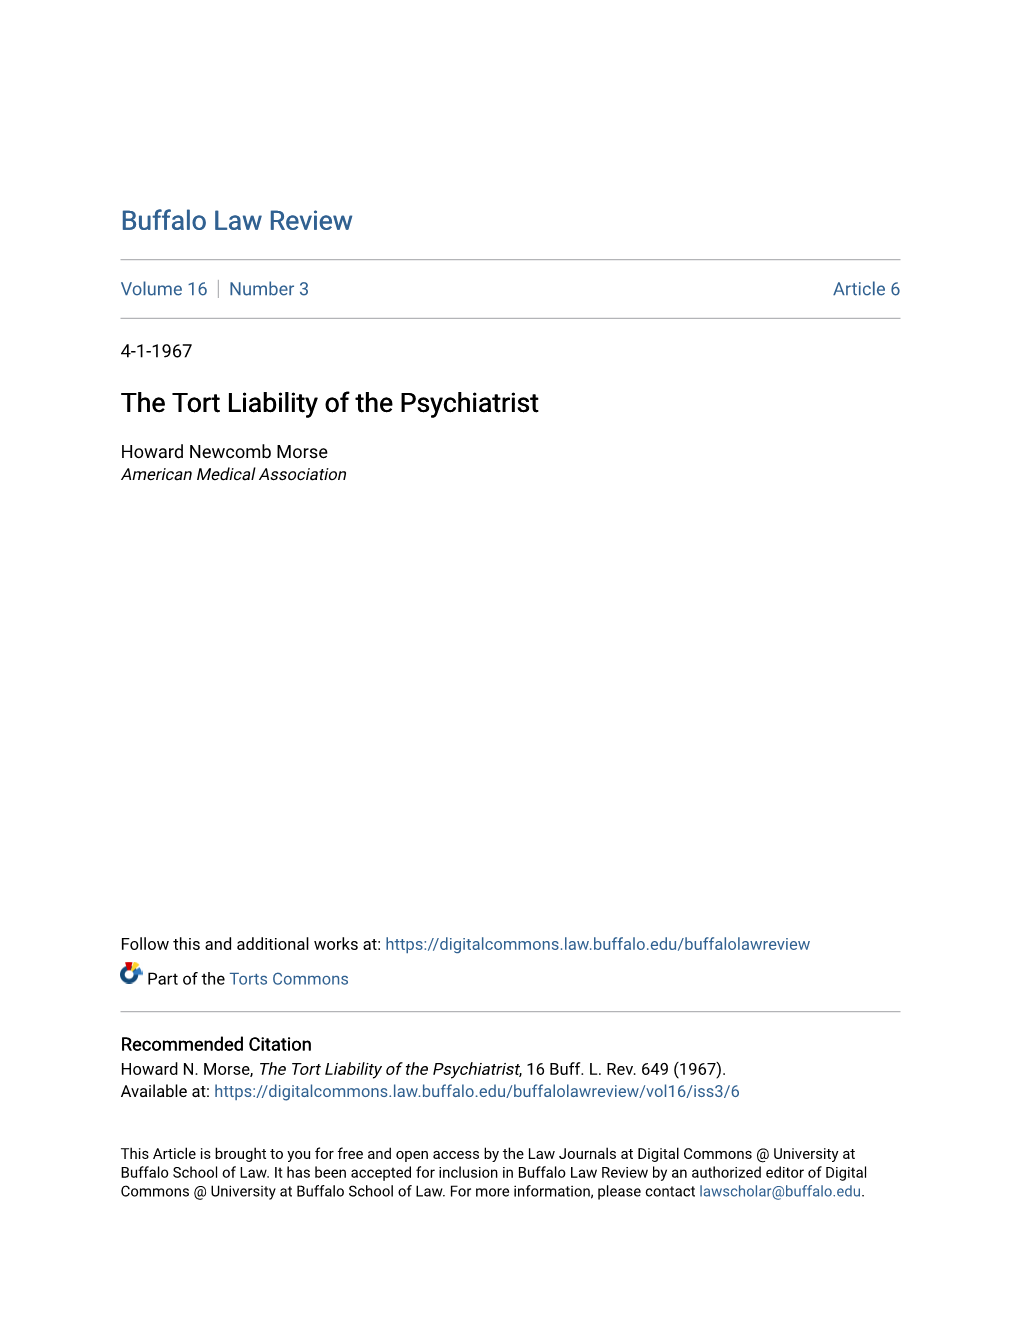 The Tort Liability of the Psychiatrist